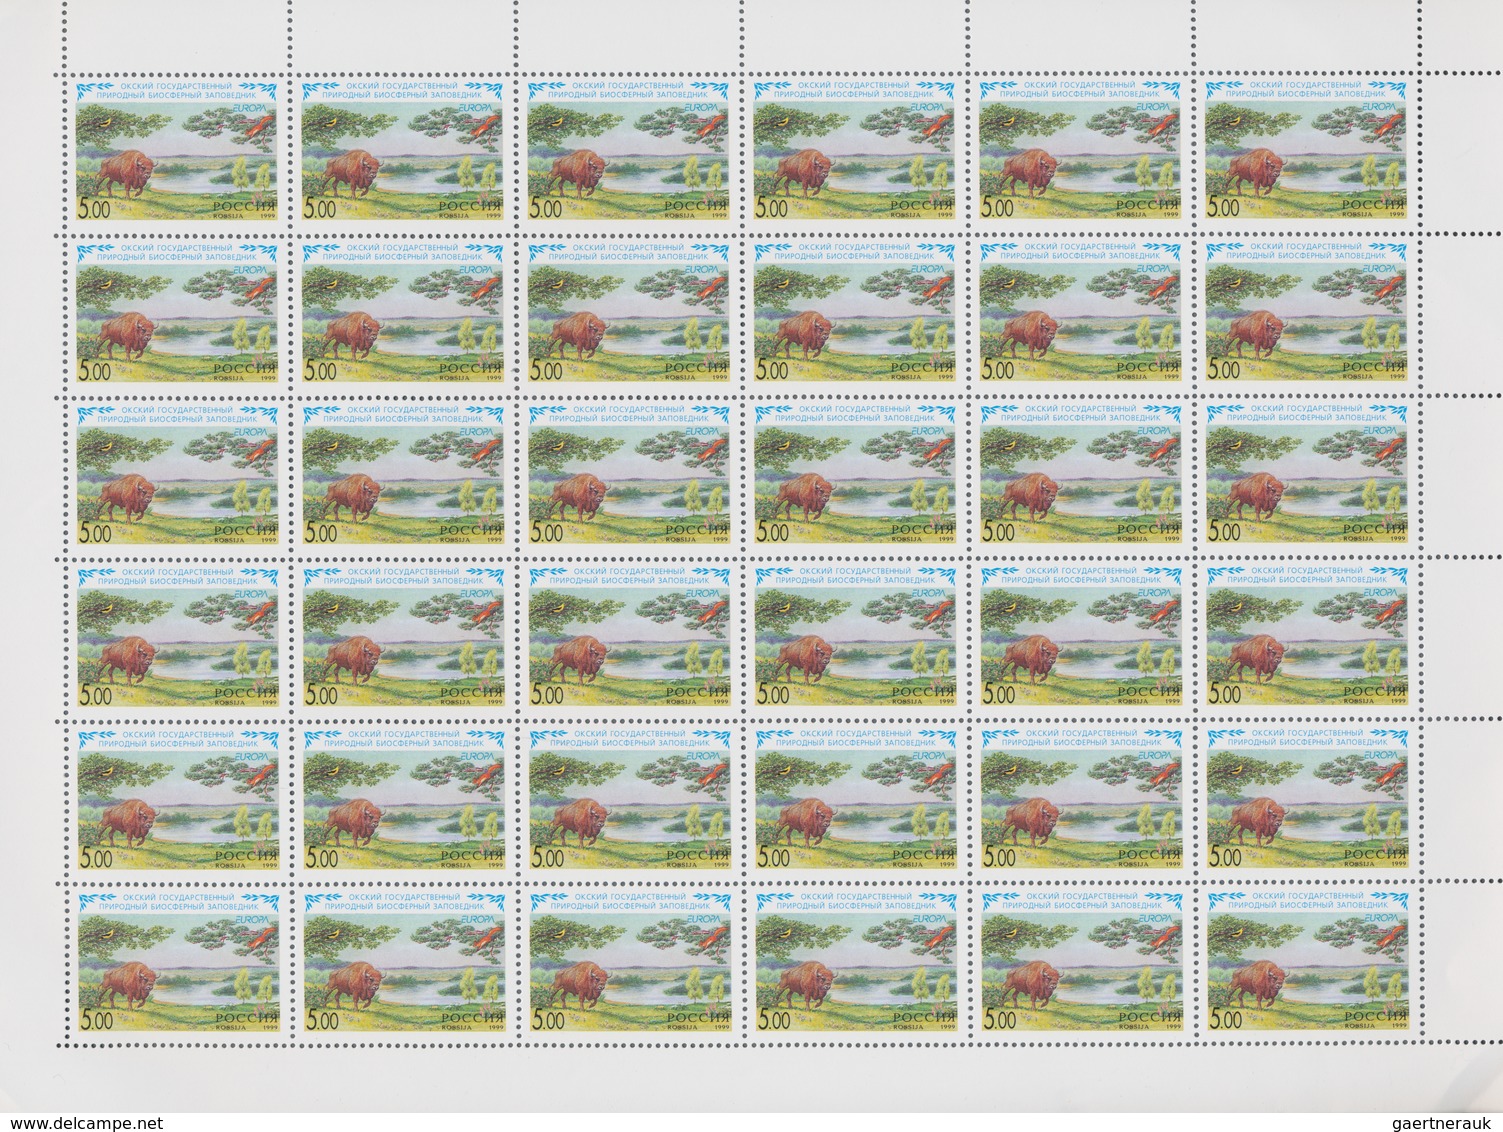 Russland: 1999, Europa (Bison), 3600 Sets Of This Issue In Sheets Of 36 Stamps Each, Mint Never Hing - Briefe U. Dokumente